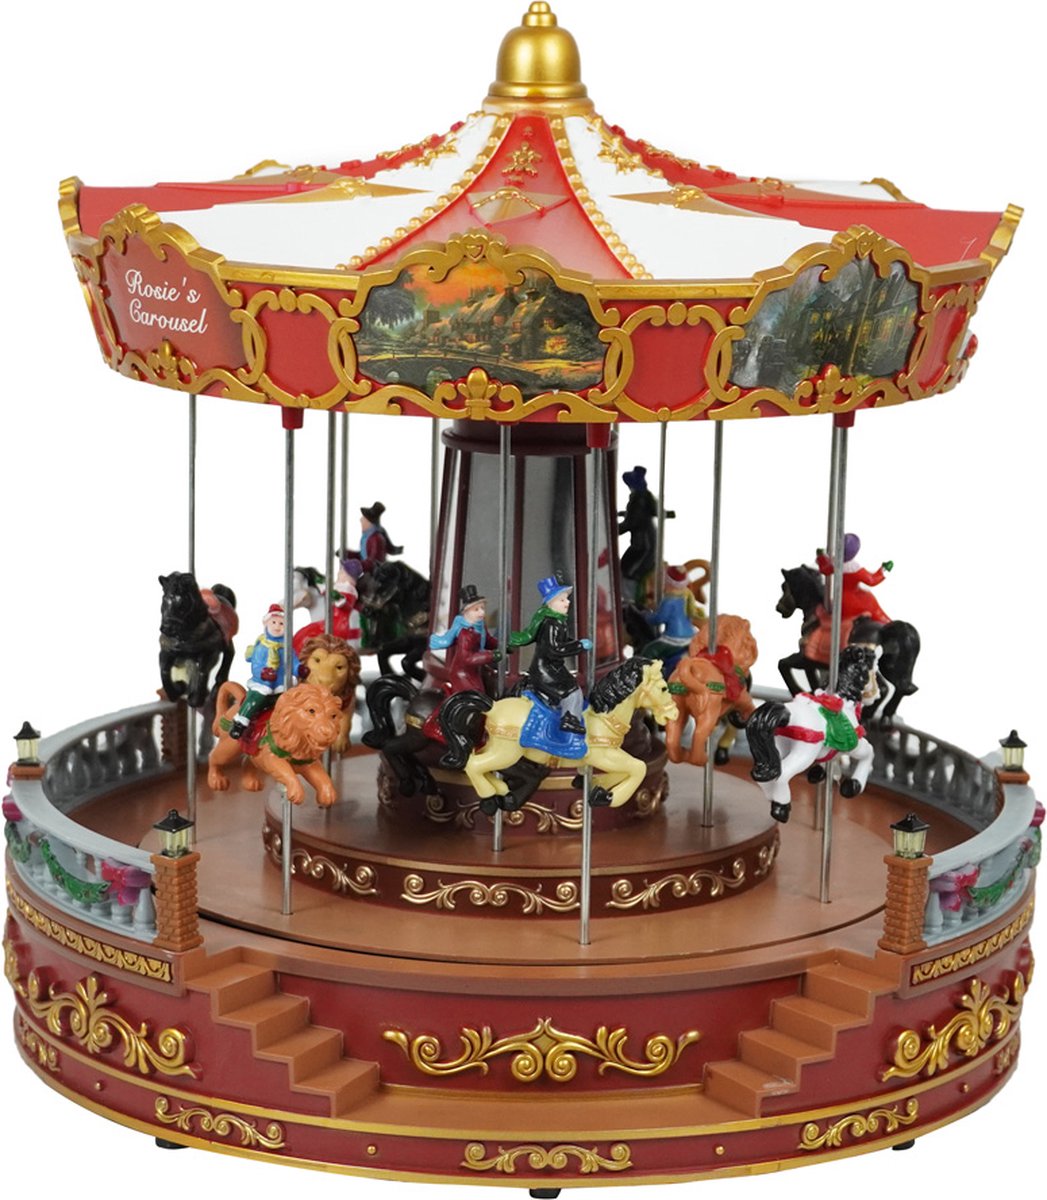 Kristmar Rosie's spinning carousel with LED lights and music